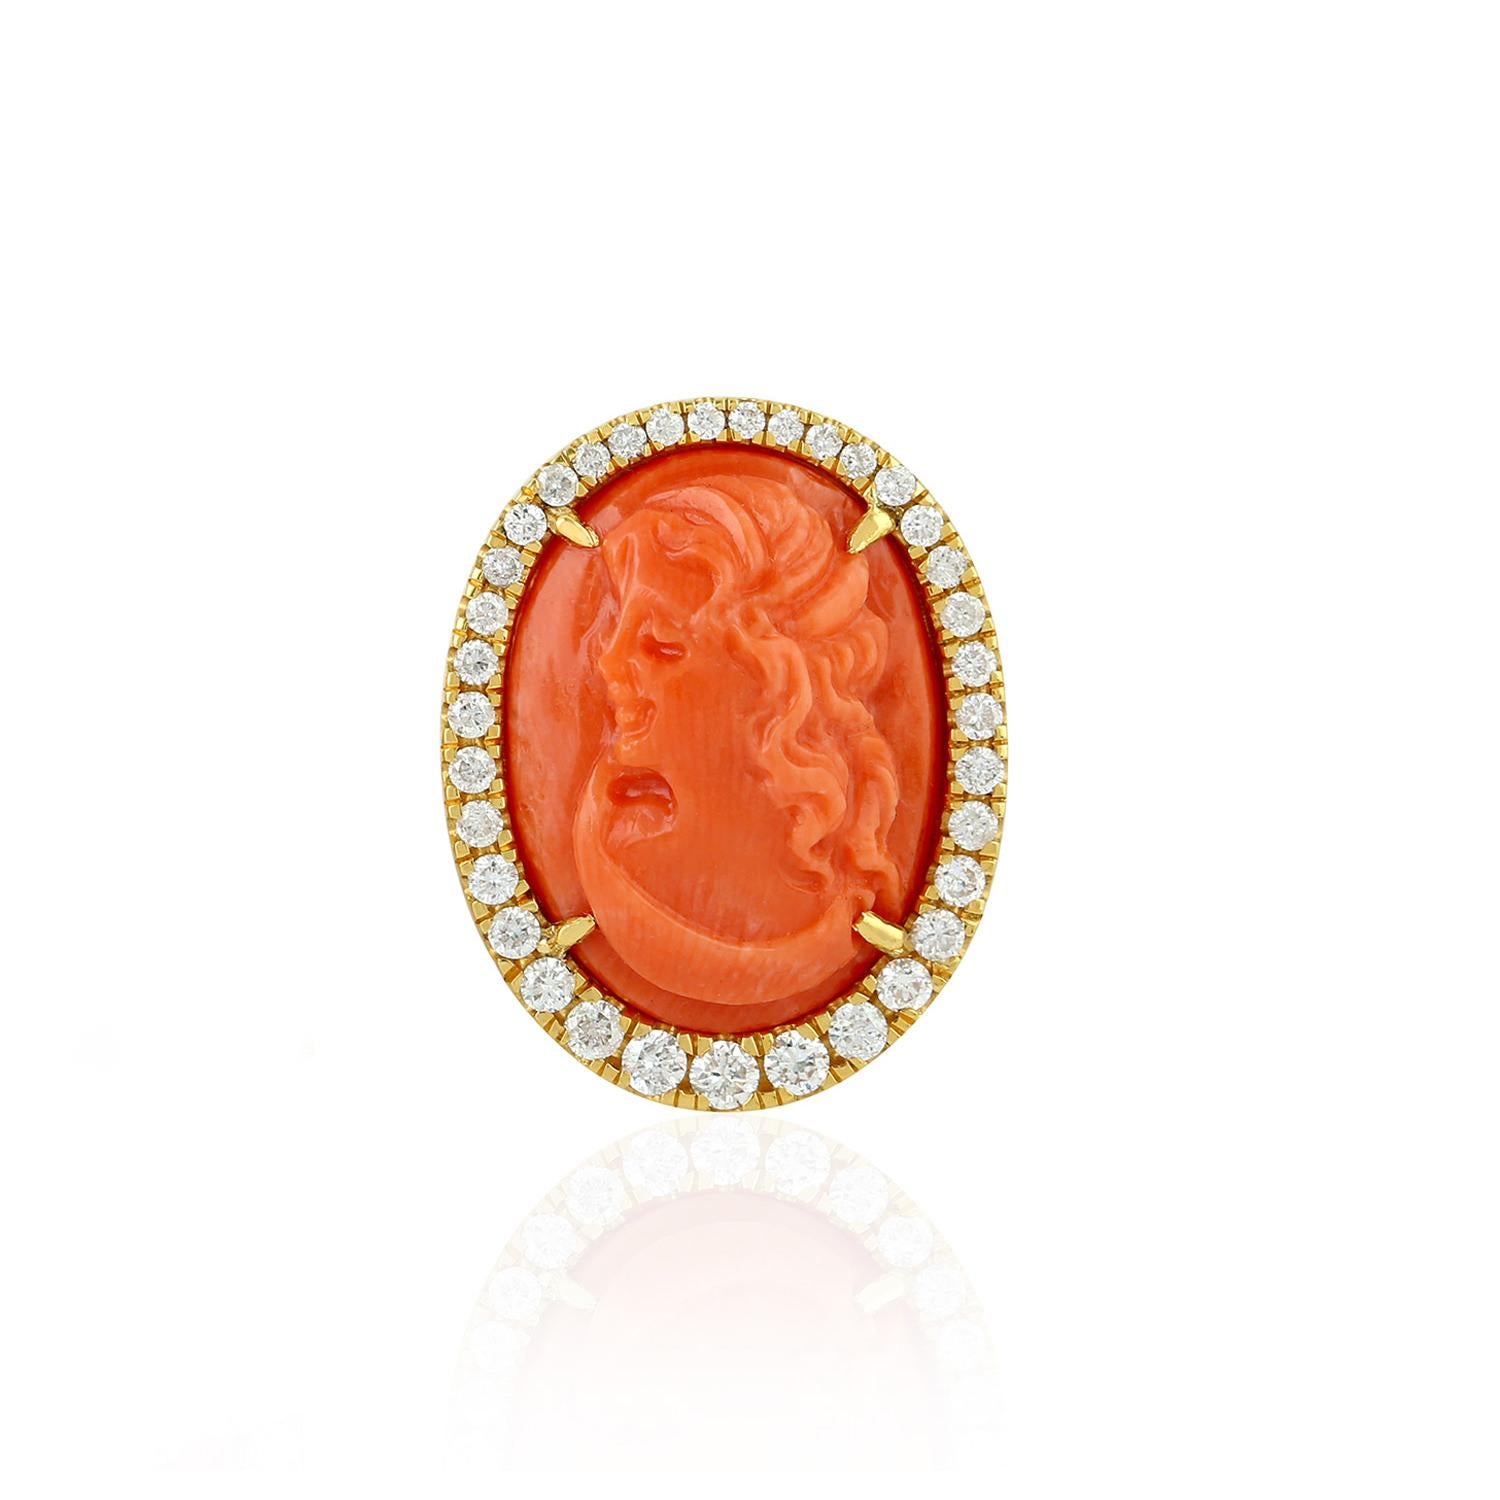 Cameo 14 Carats Fine Coral & Diamond Halo Earrings 18K Yellow Gold In Excellent Condition For Sale In Laguna Niguel, CA